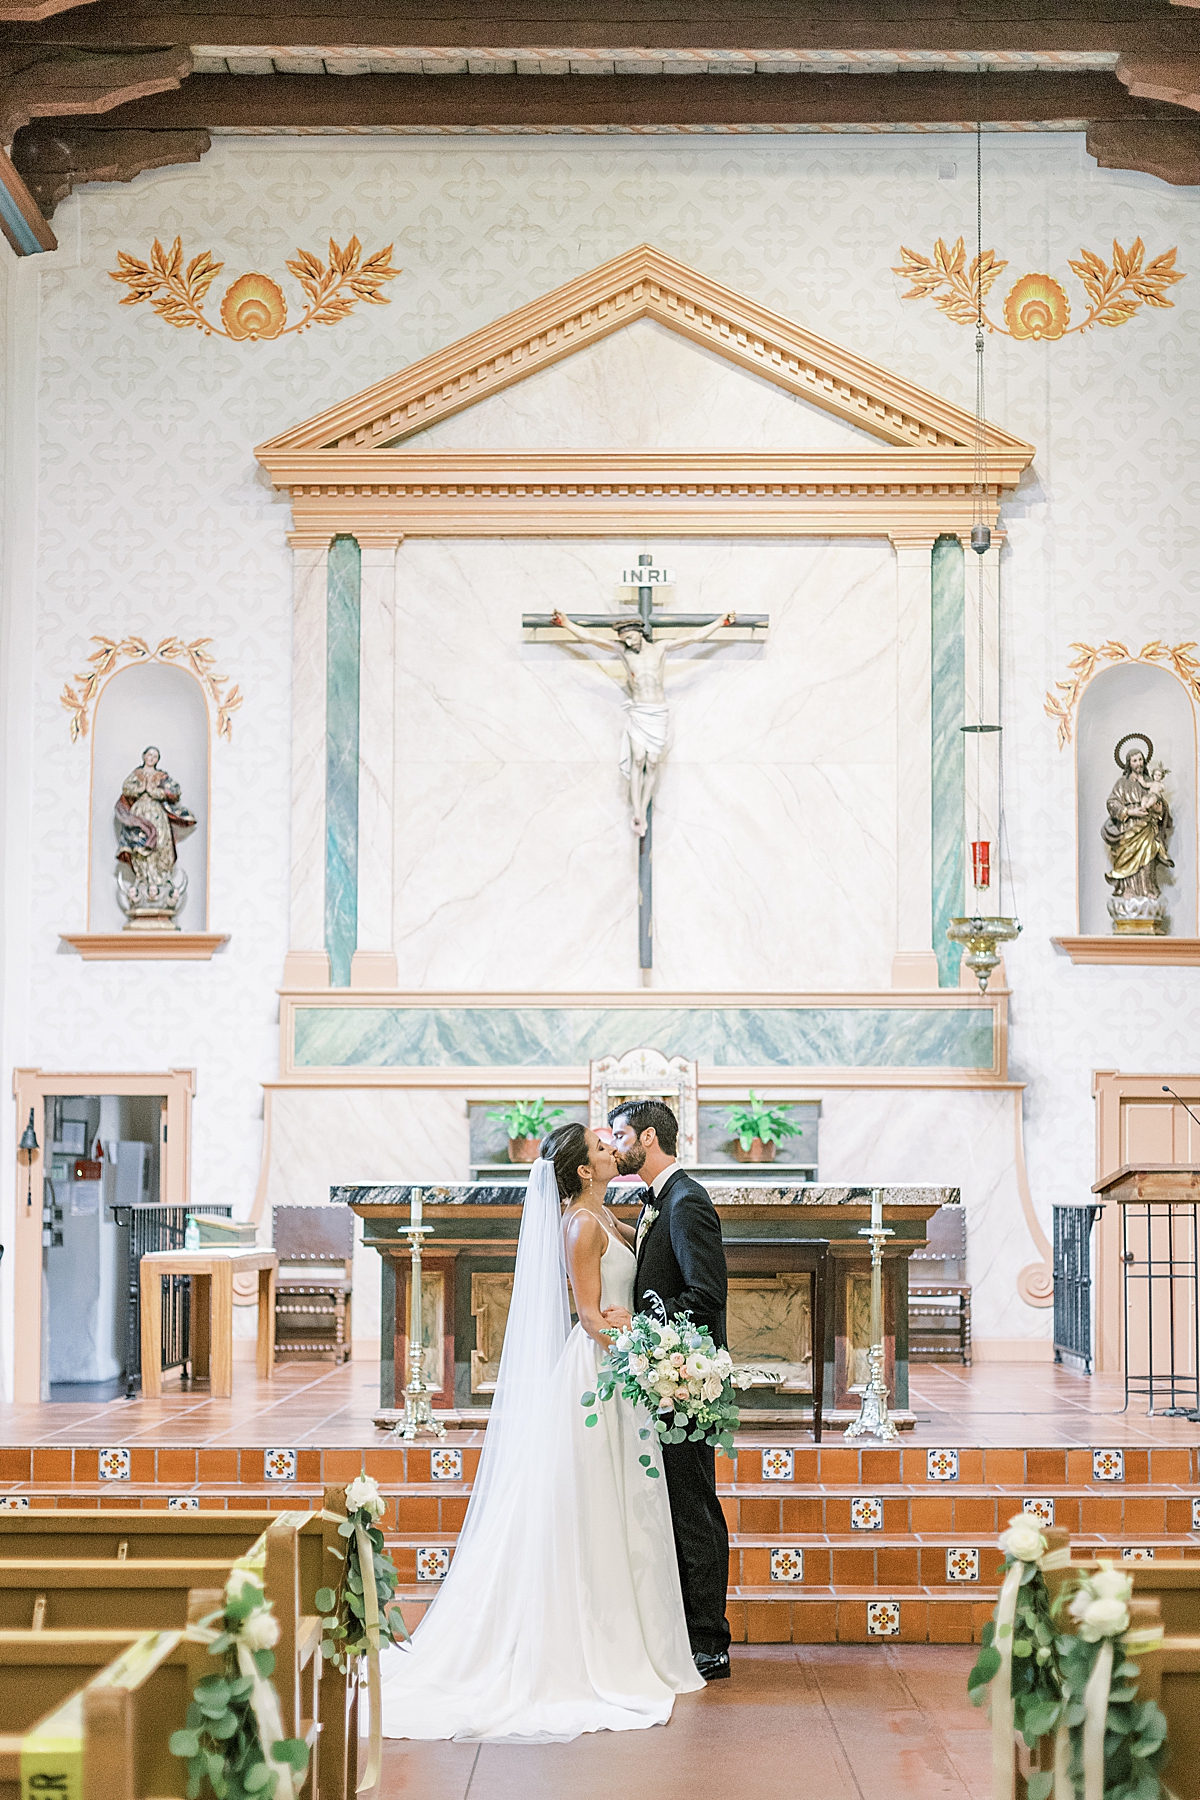 The newlyweds sharing a kiss in front of the altar at the Mission in San Luis Obispo, California. 